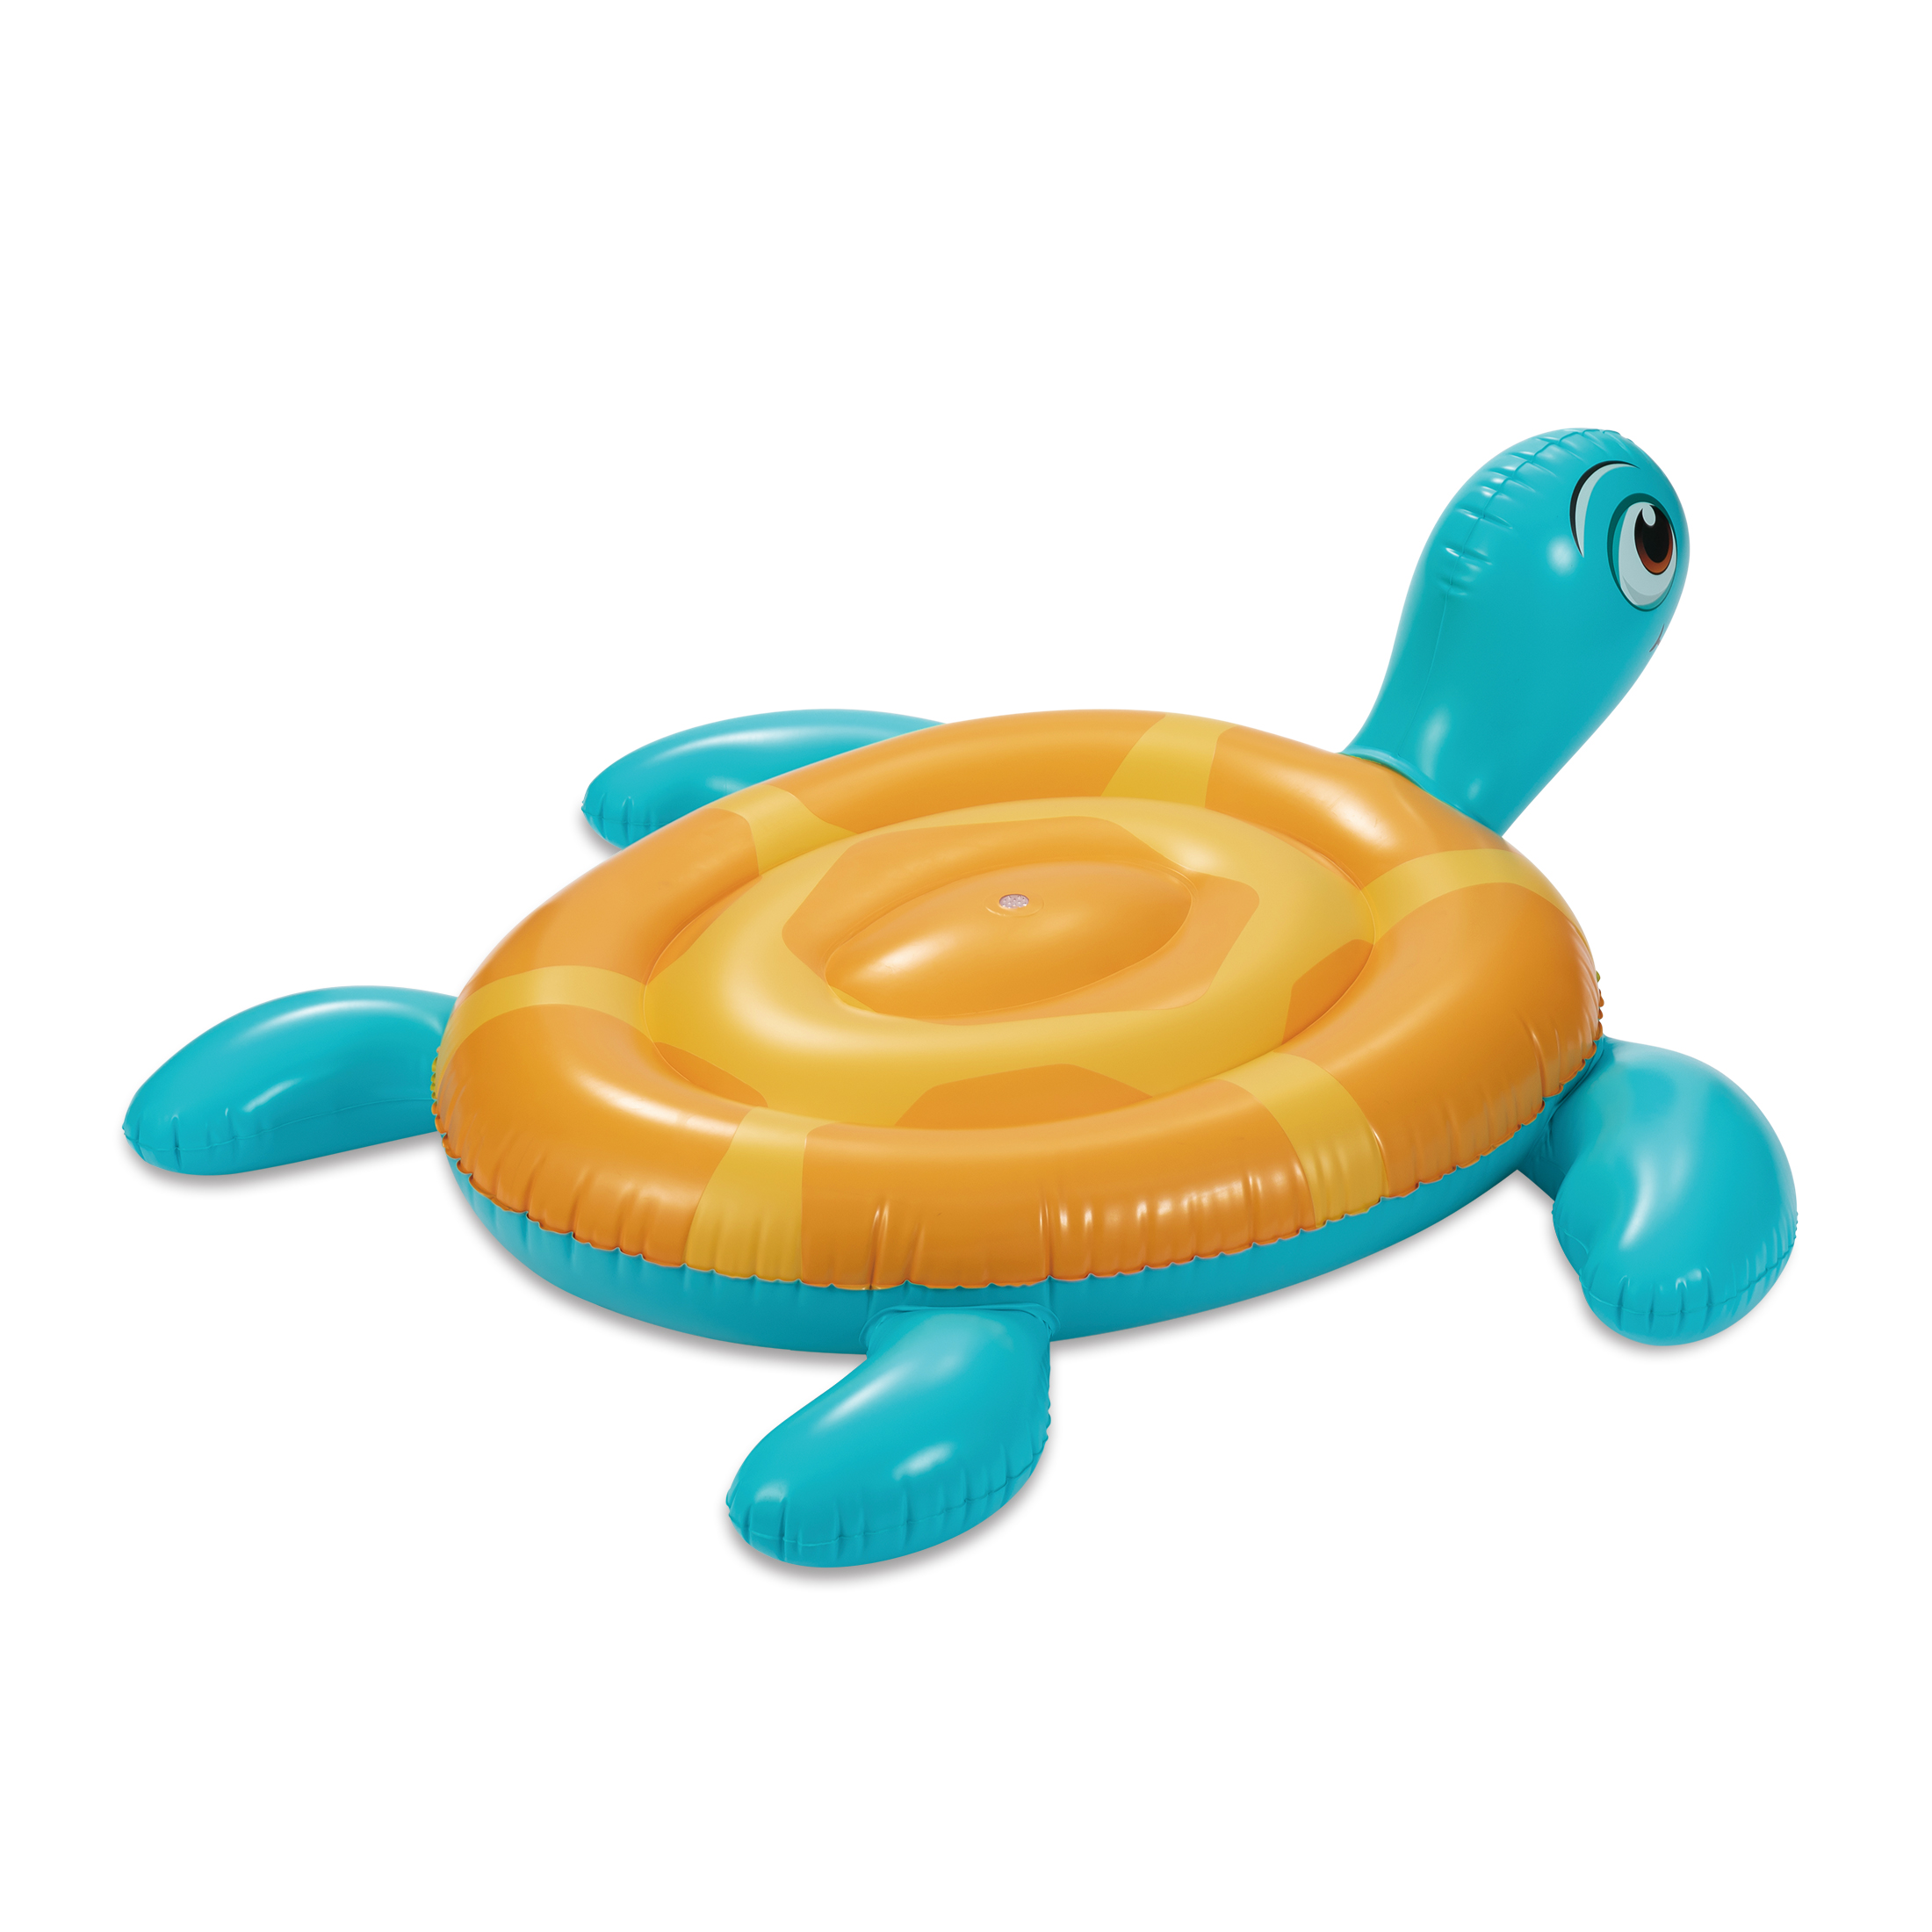 Play Day Inflatable Sea Turtle Water Sprinkler Yard Game, for Kids, Age 3 & up, Unisex - image 5 of 5